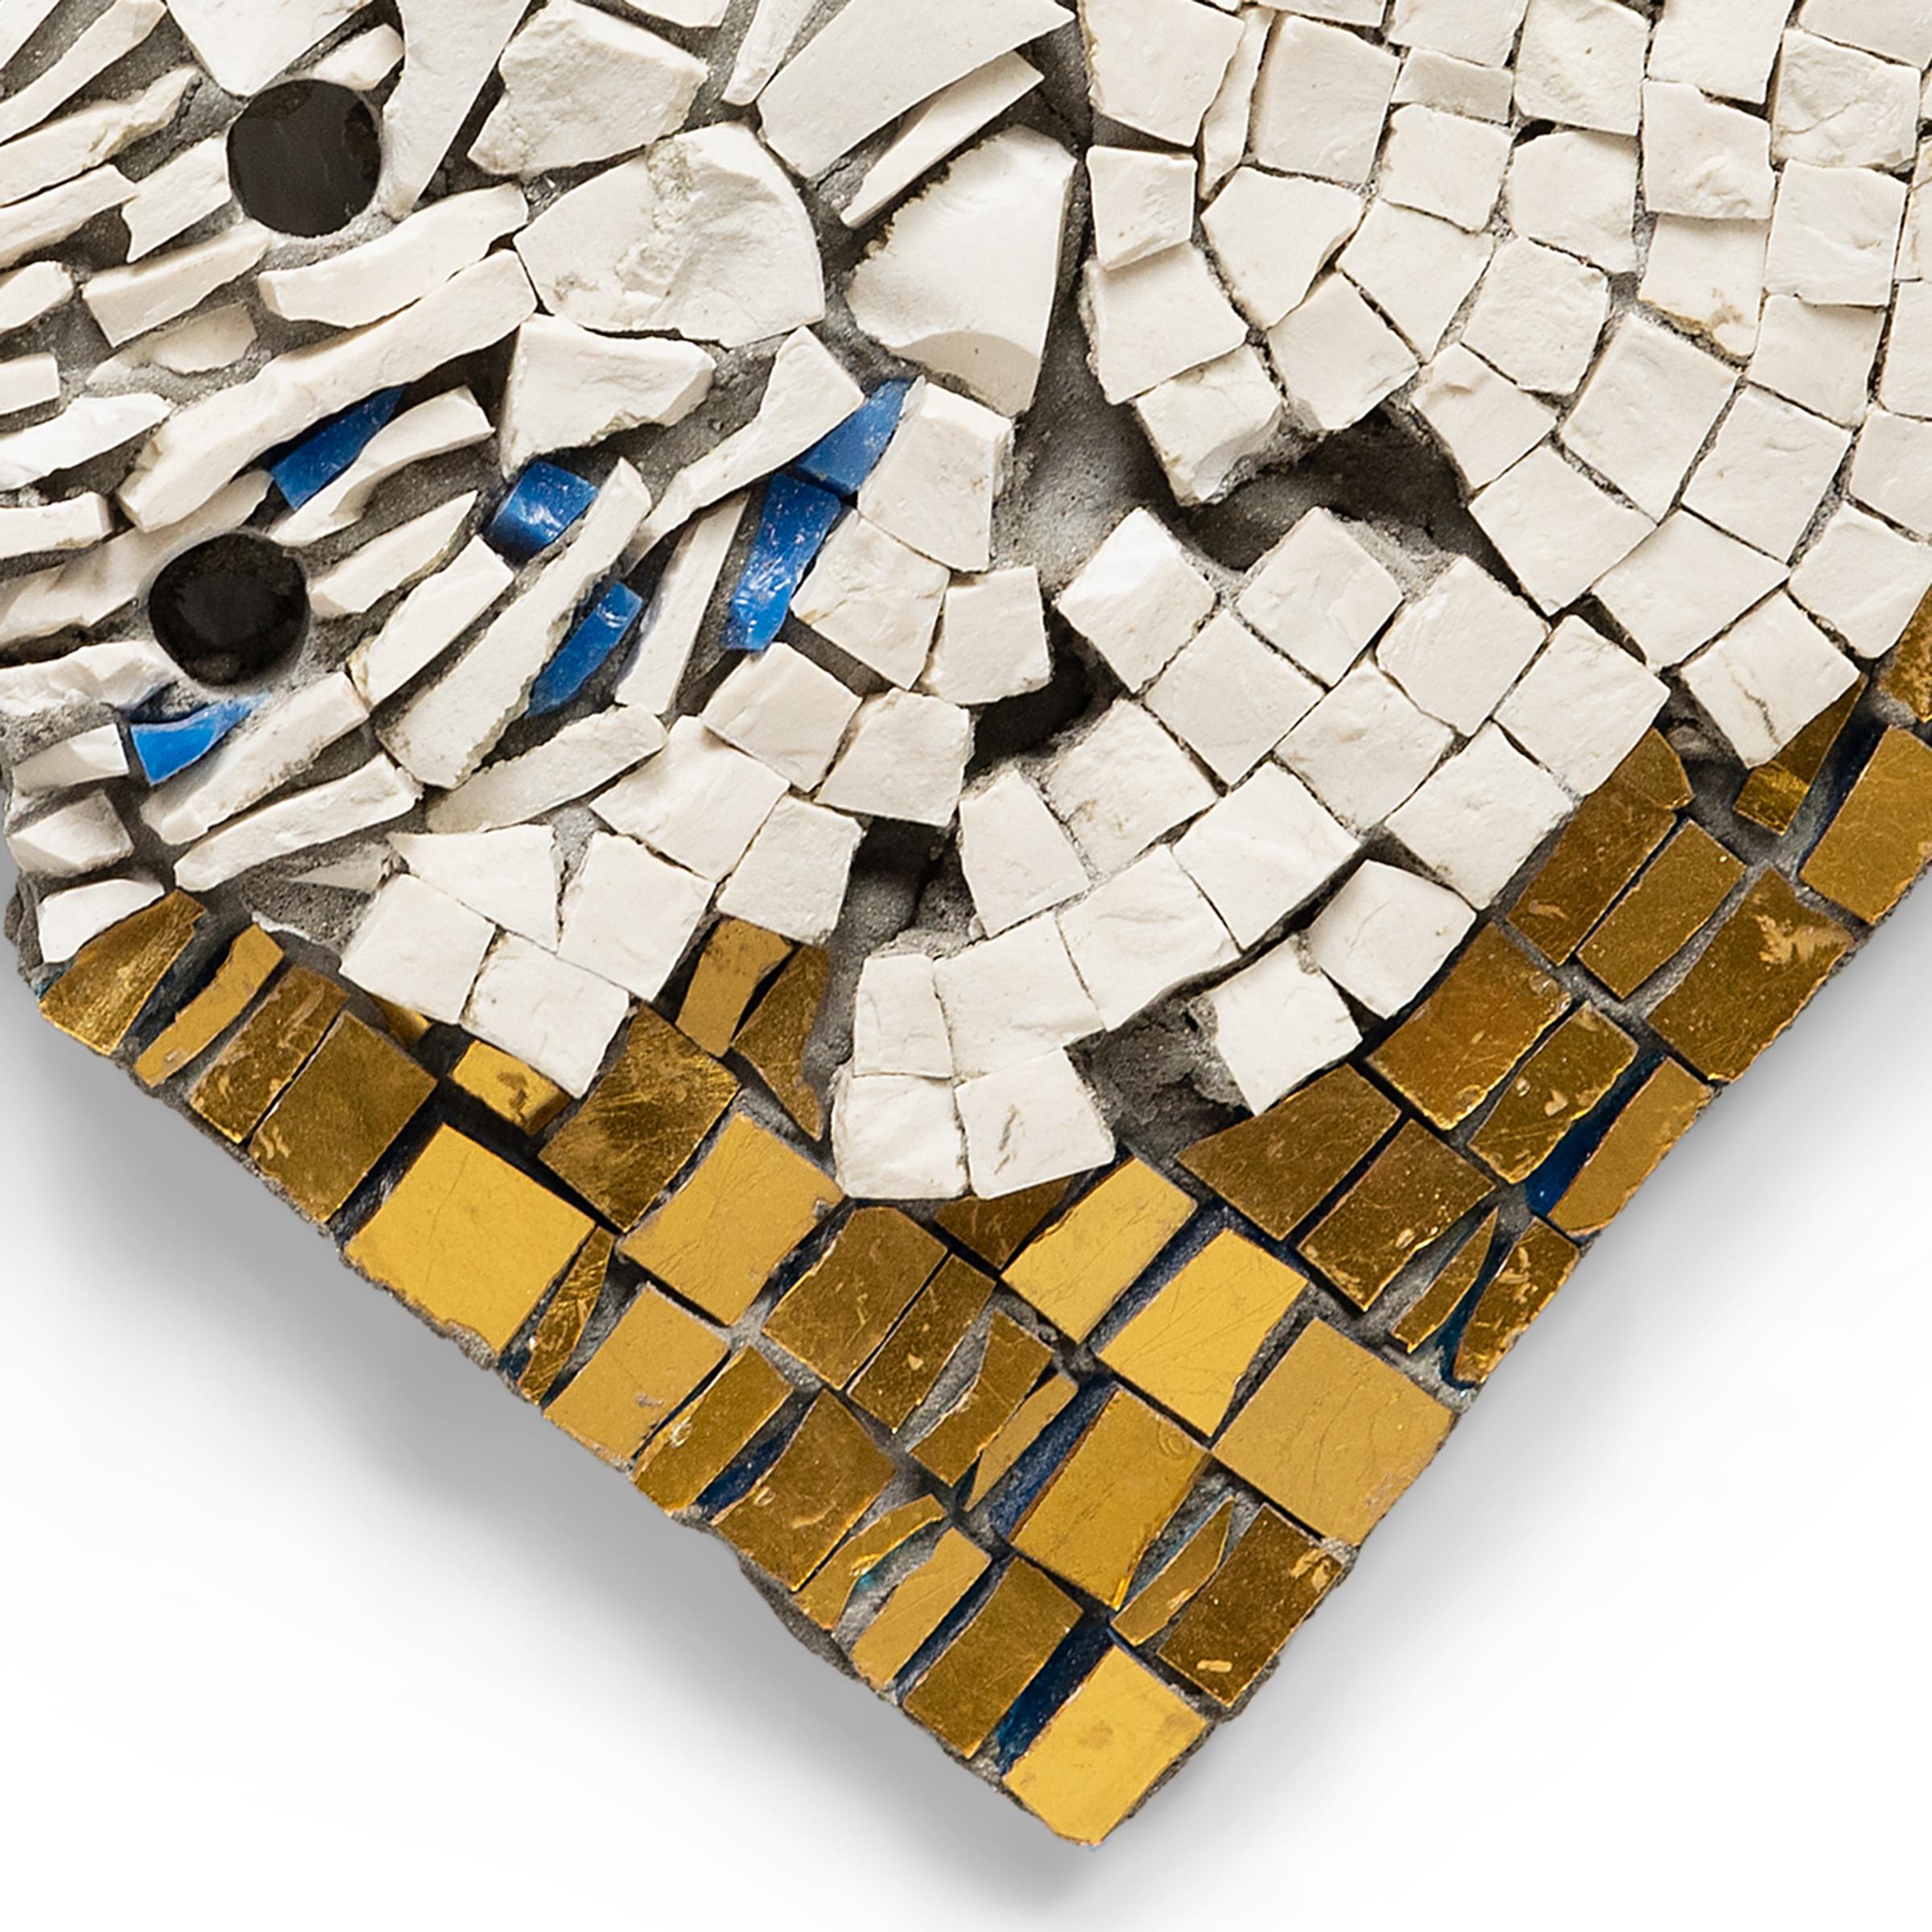 In the series “Heavenly,” Toyoharu Kii honors the fullness of life and its continual rebirth. In some works, white tesserae assume abstract profiles. In others, irregular shapes contain a disorderly array of jagged tiles, suggesting the unexpected